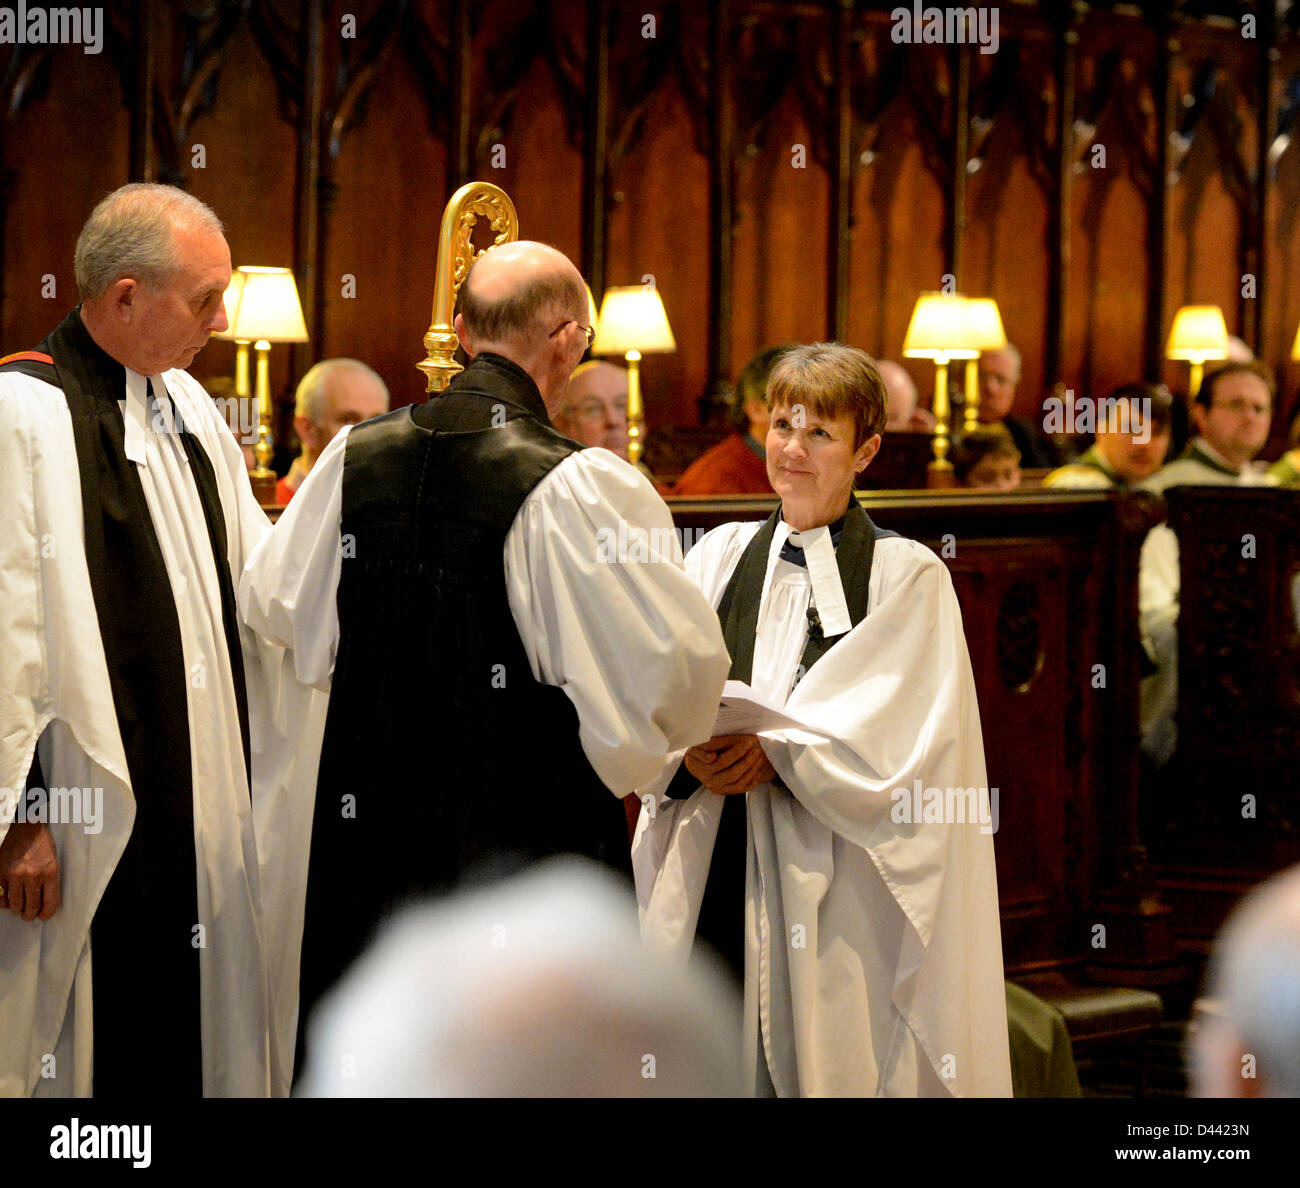 Chichester, UK. 3rd March, 2013. The Reverend Canon Julia Peaty was licensed as the Dean of Women's Ministry by Bishop Martin at a service held in Chichester Cathedral last night (3rd March). The new post has been created to encourage more female priests to be ordained into the Diocese of Chichester. Bishop Martin is pictured (left) with Rev Canon Julia Peaty (right). Credit: Jim Holden/Alamy Live News Stock Photo